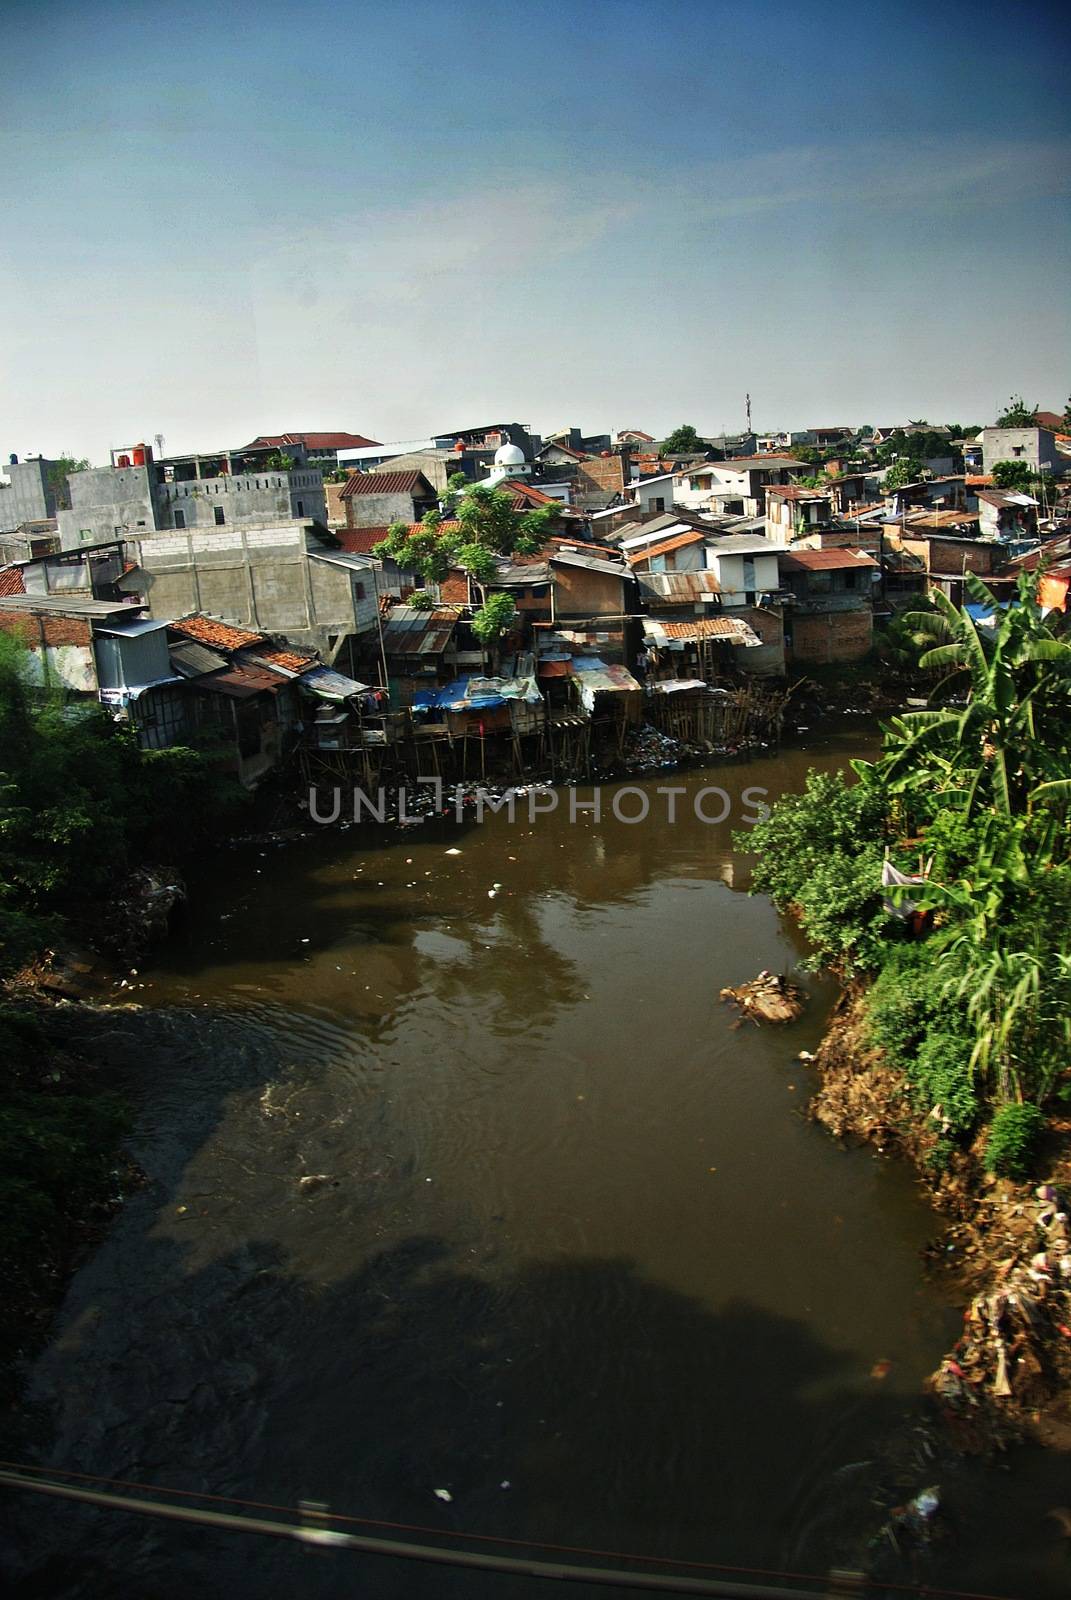 Jakarta slums area seen from a moving train